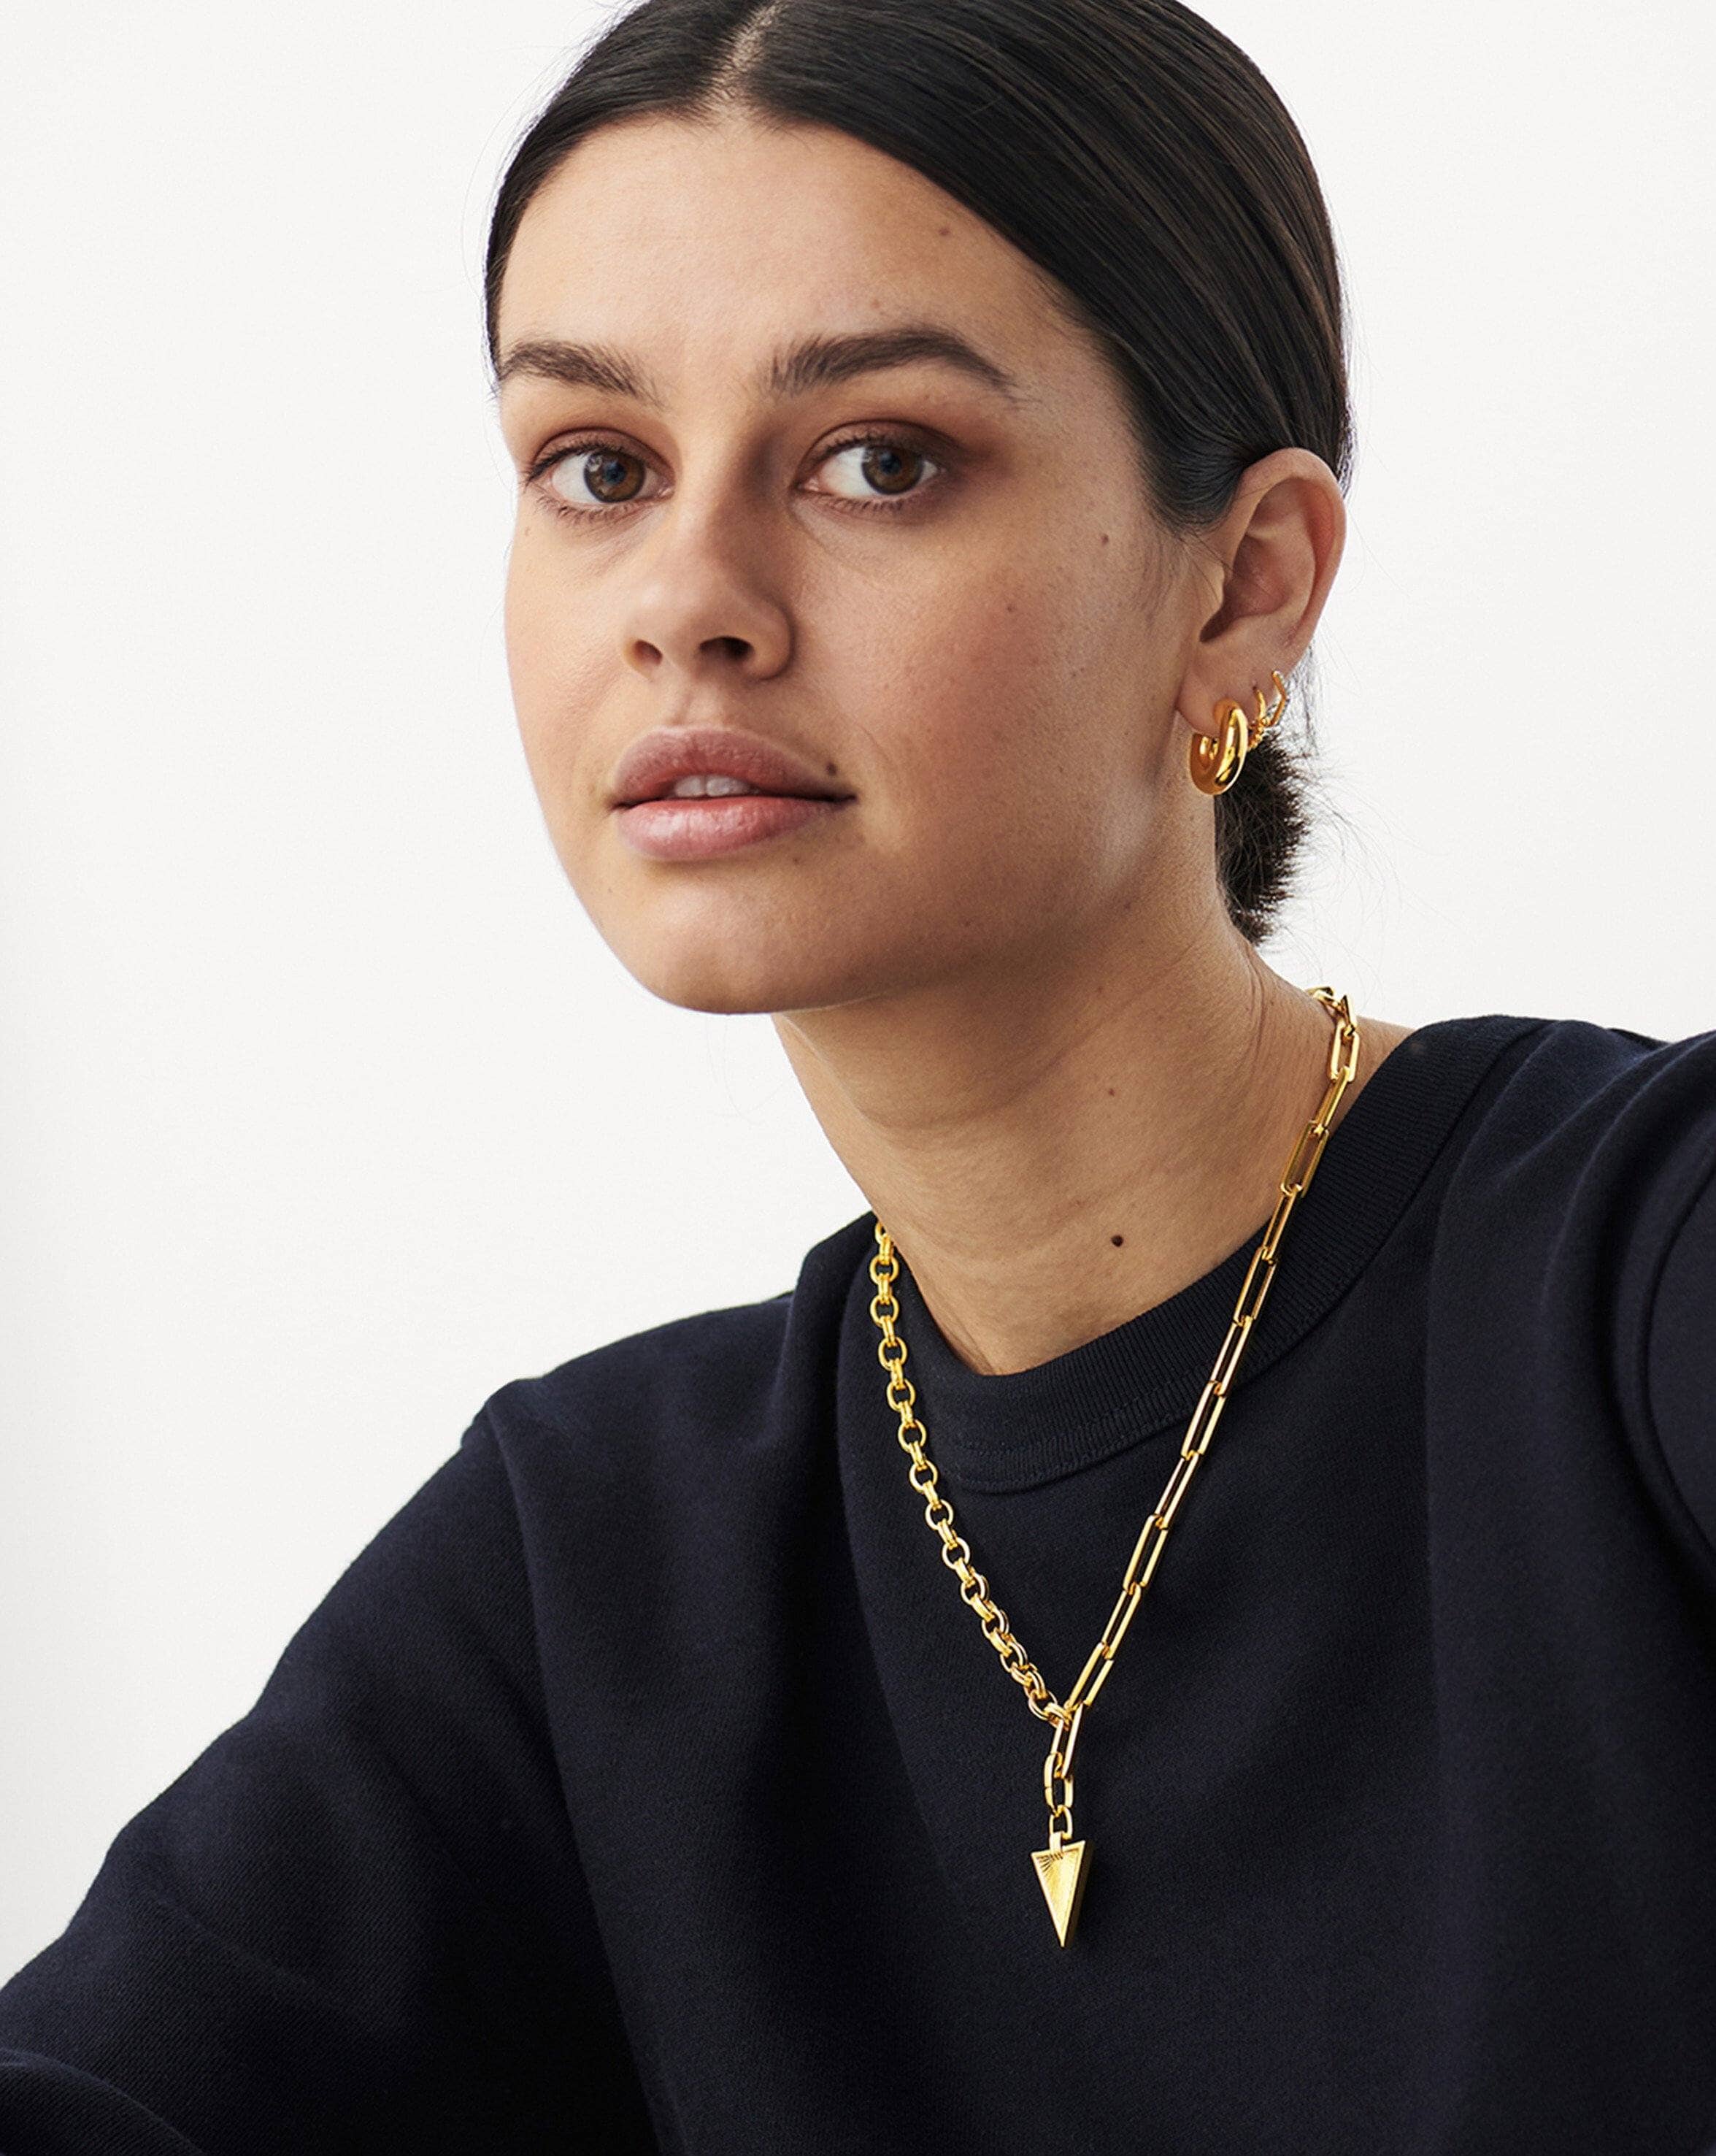 Deconstructed Axiom Ridge Triangle Chain Necklace | 18ct Gold Plated Necklaces Missoma 